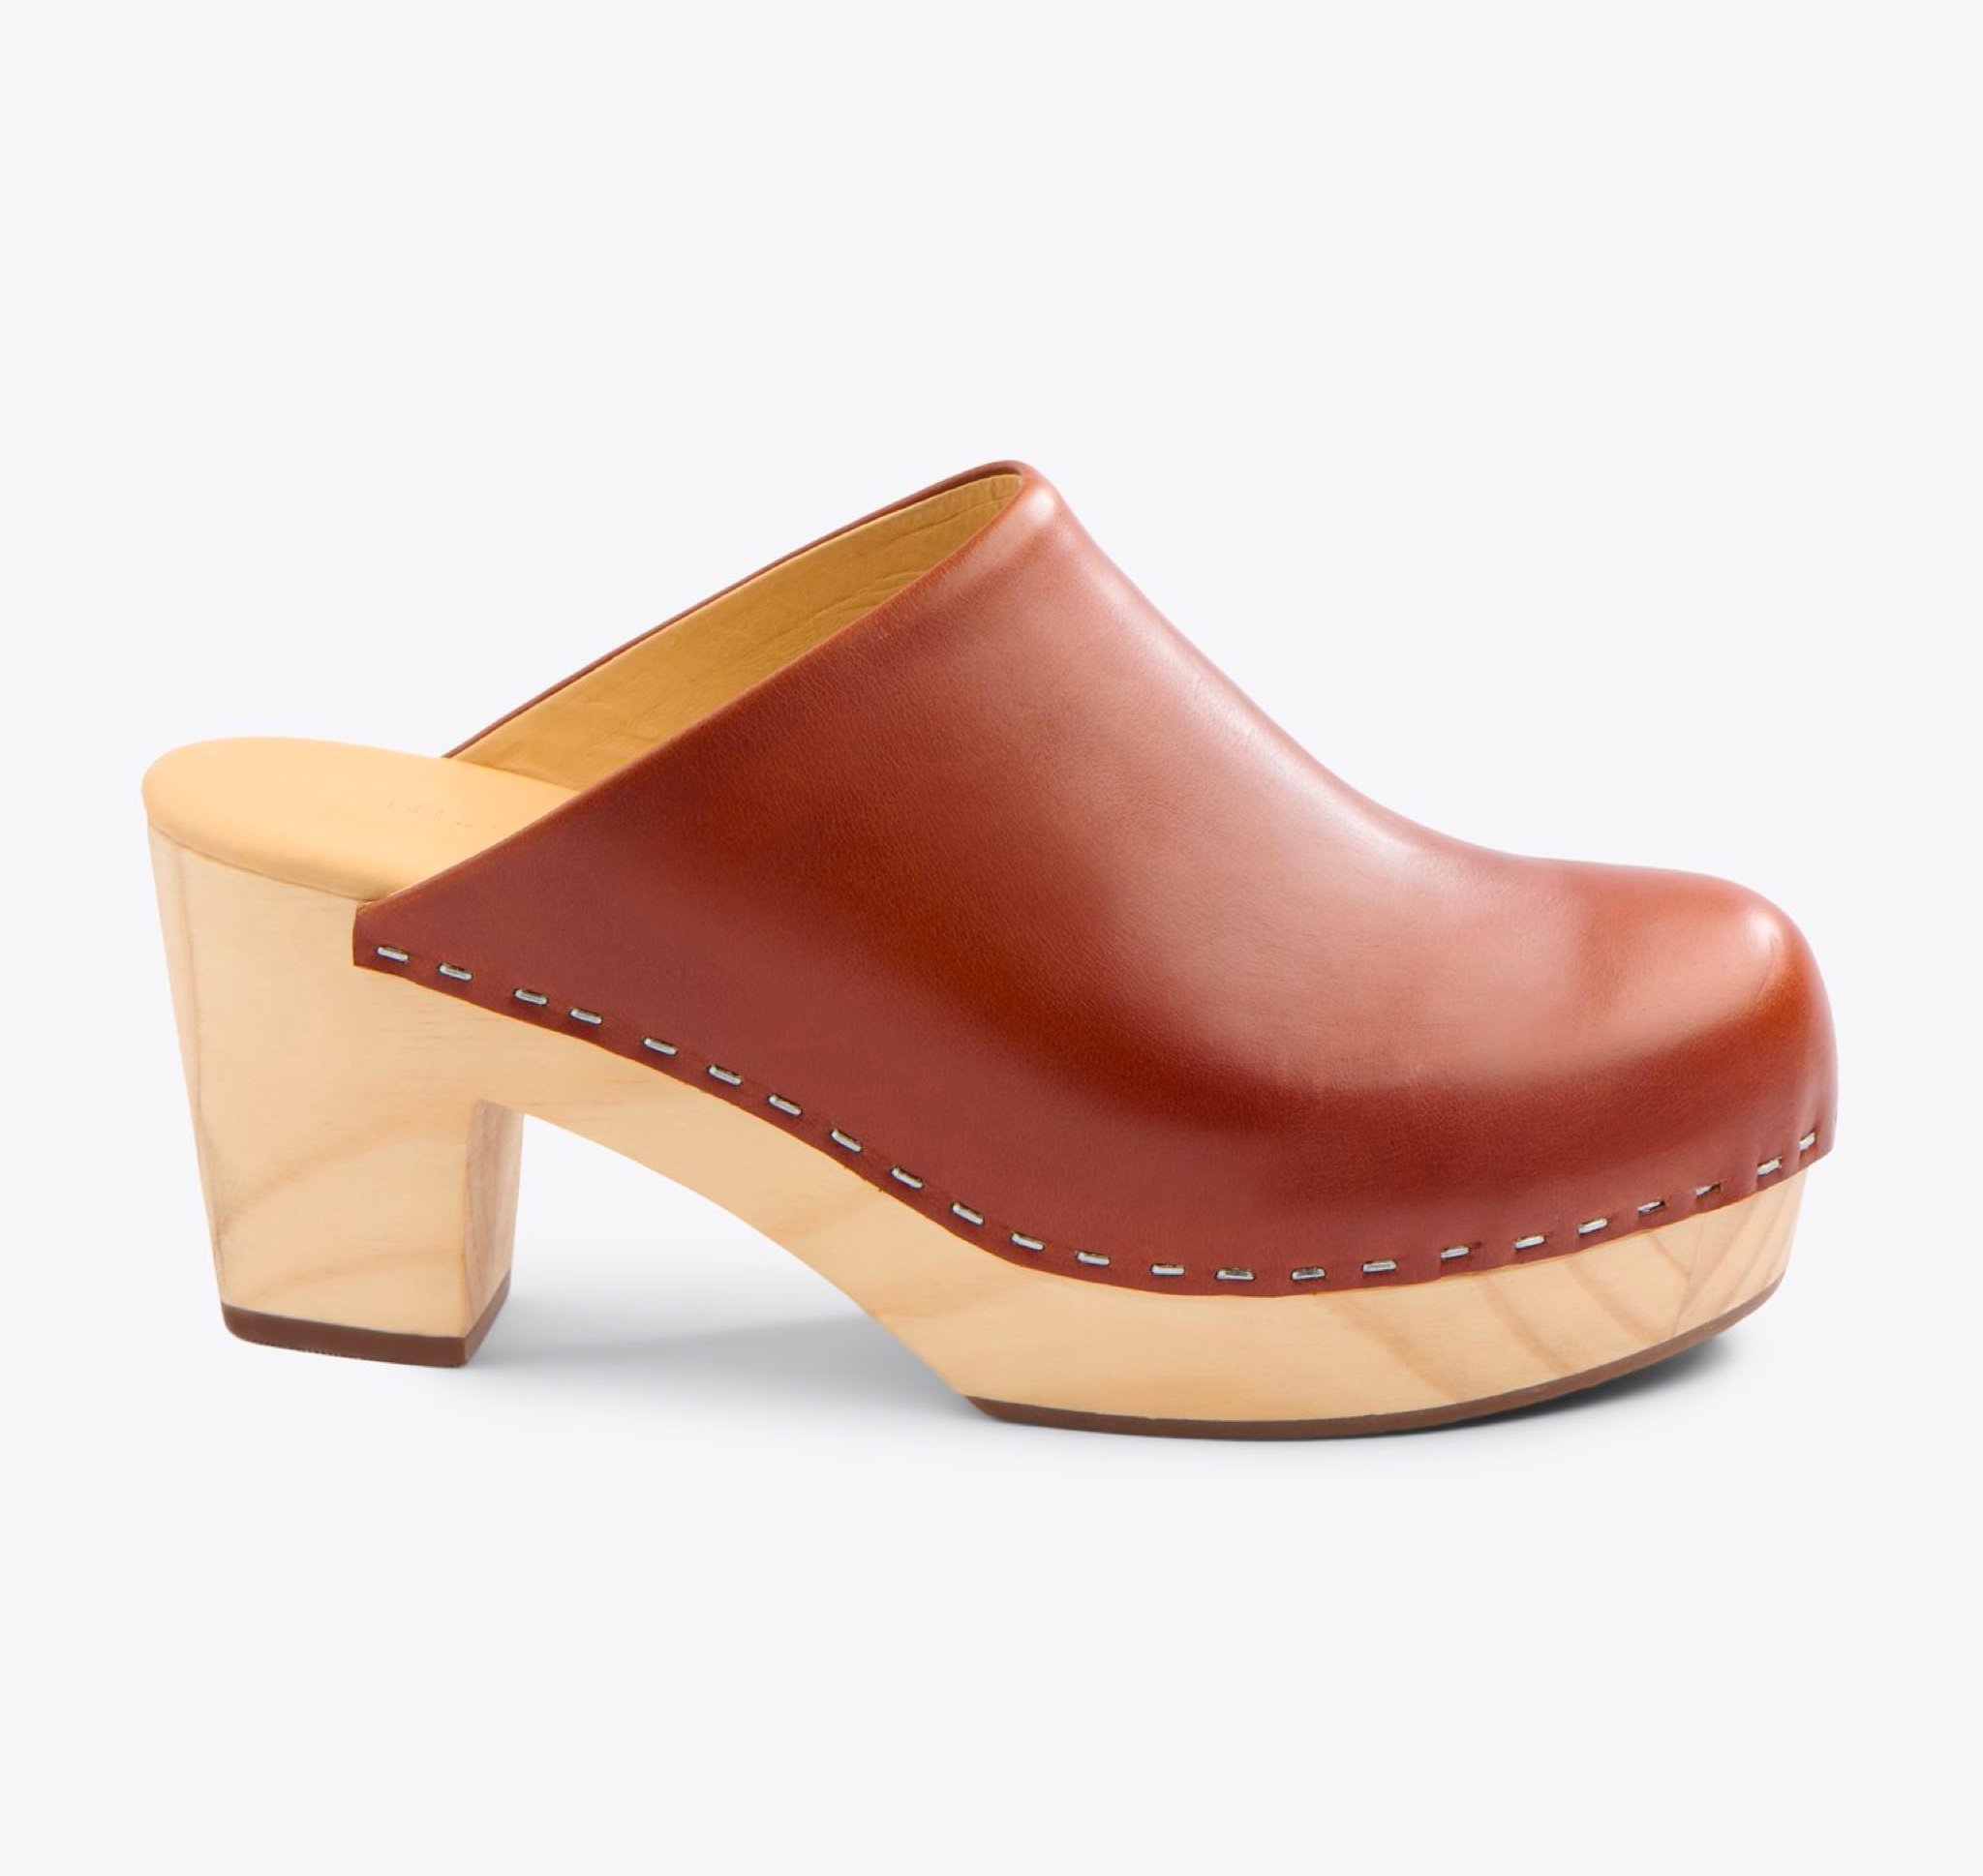 Nisolo All-Day Heeled Clog Brandy - Every Nisolo product is built on the foundation of comfort, function, and design. 